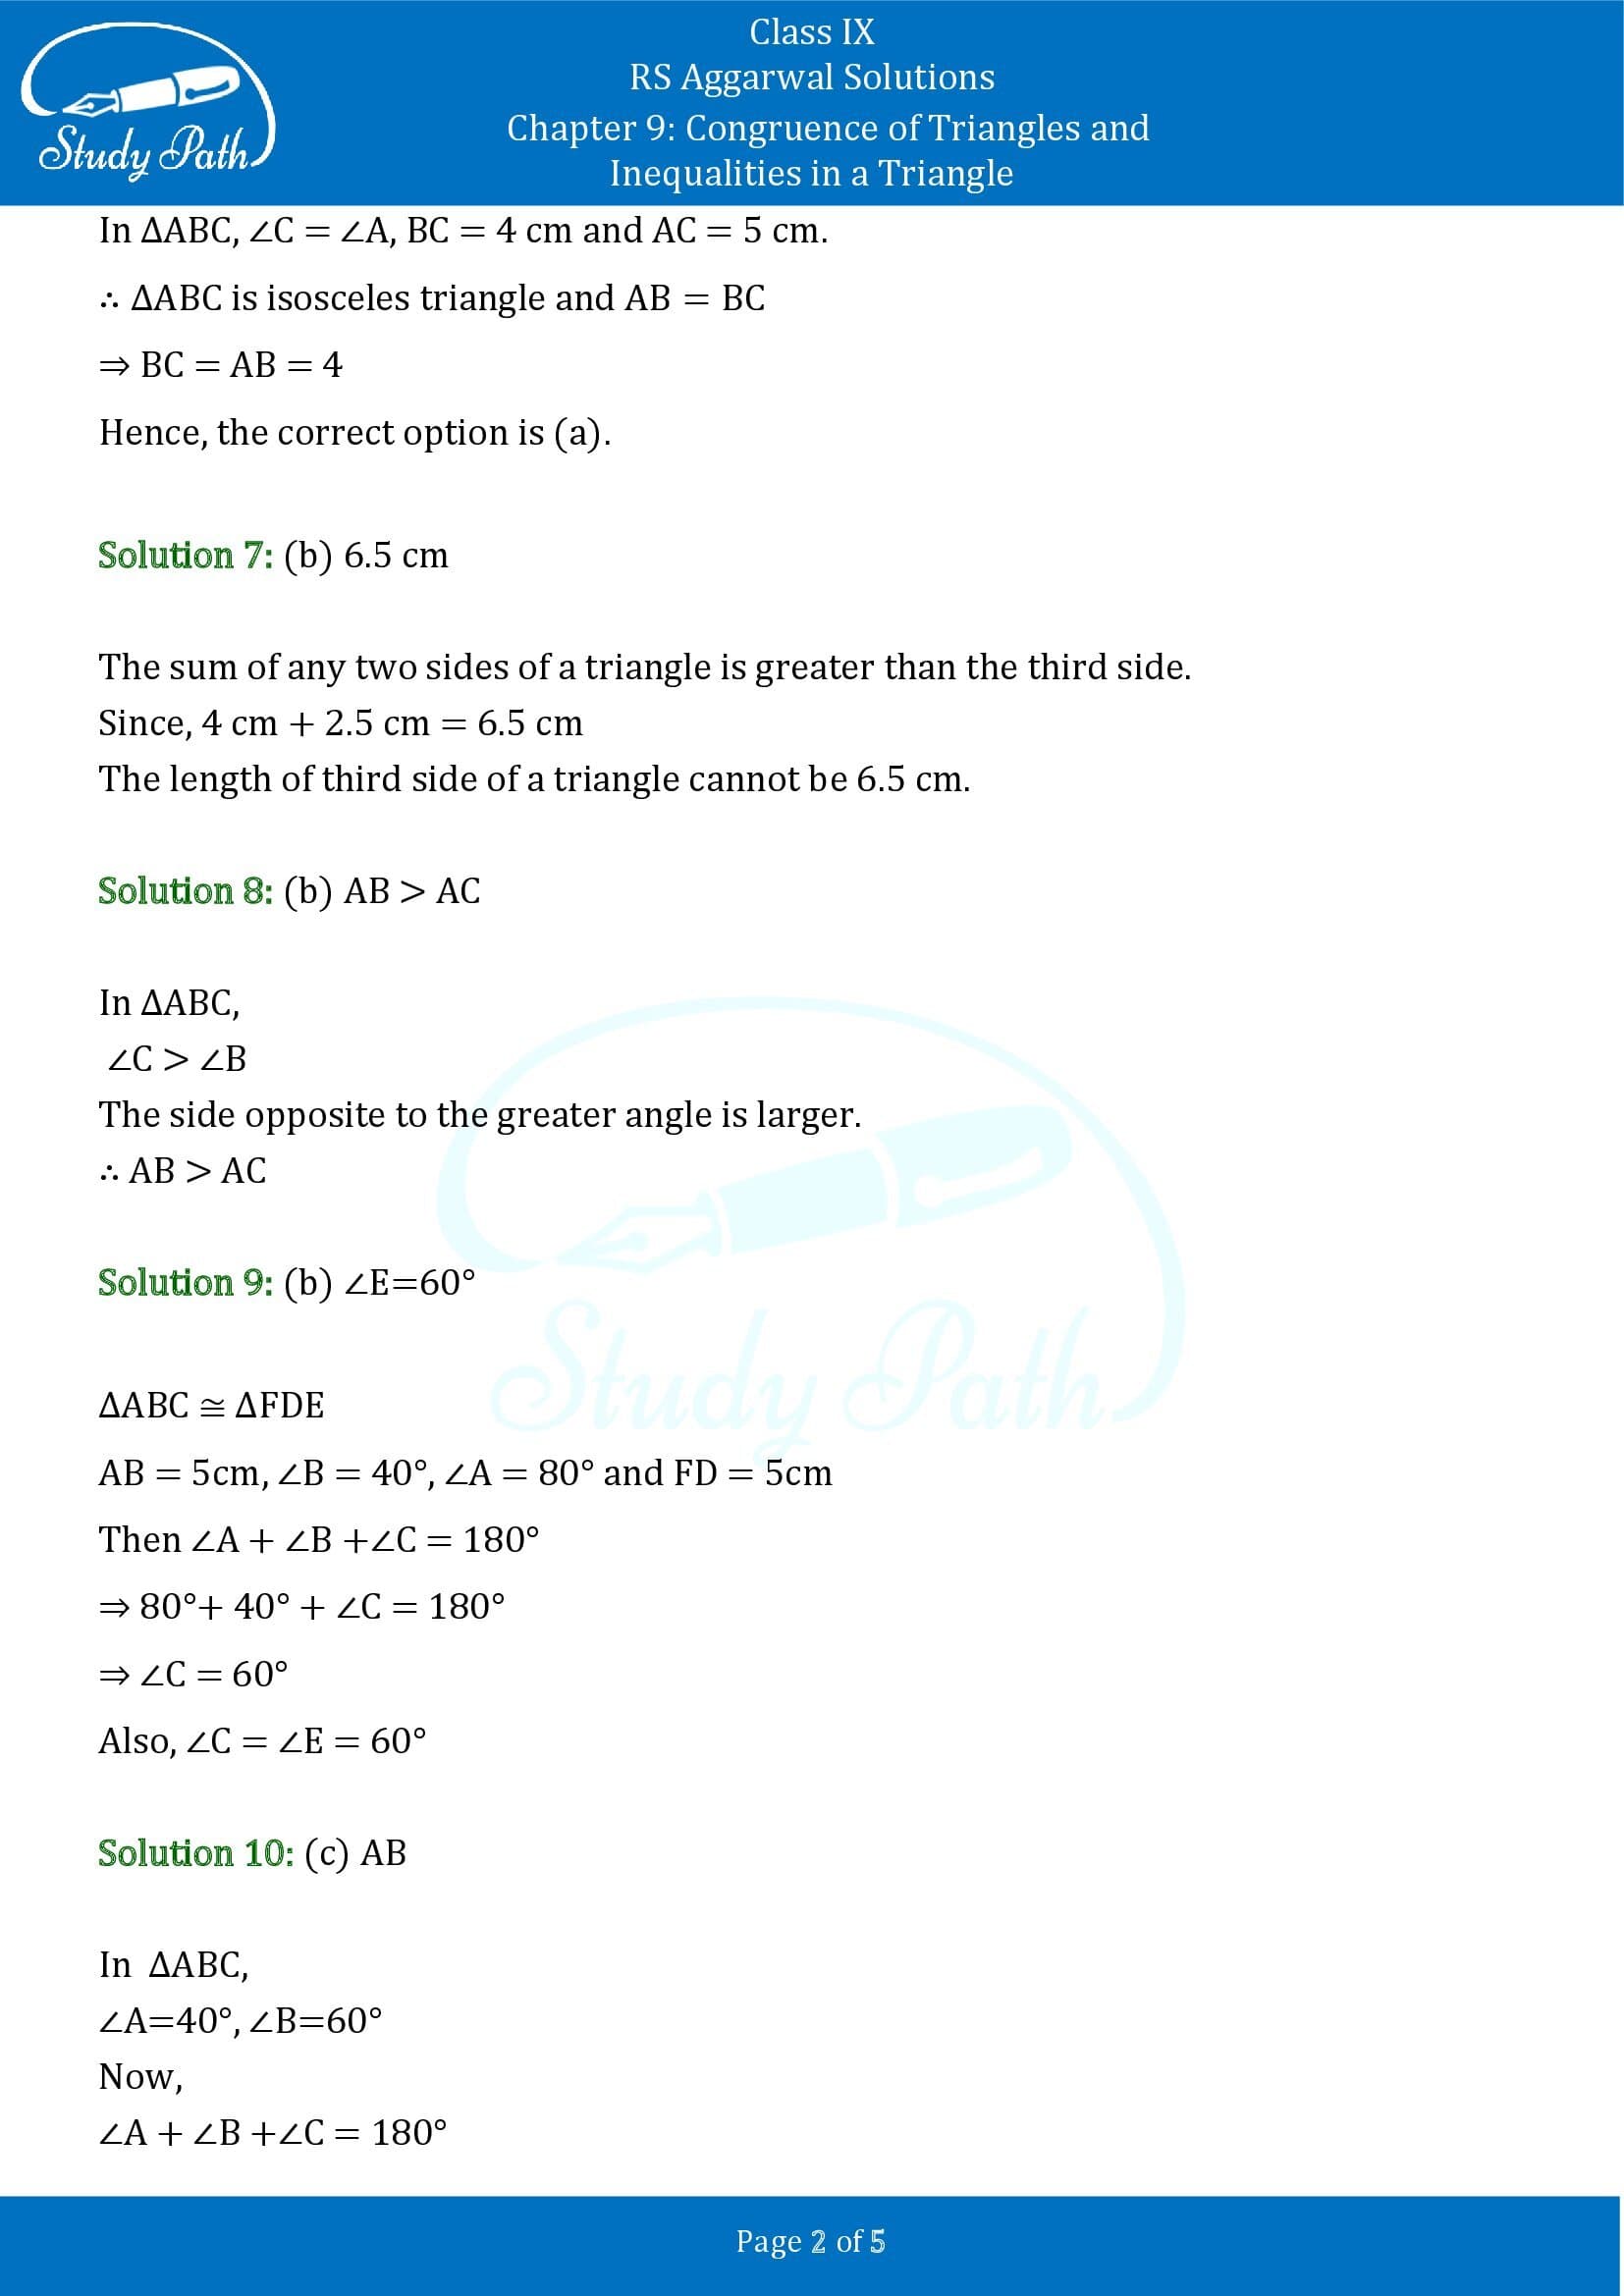 RS Aggarwal Solutions Class 9 Chapter 9 Congruence of Triangles and Inequalities in a Triangle Multiple Choice Questions MCQs 00002